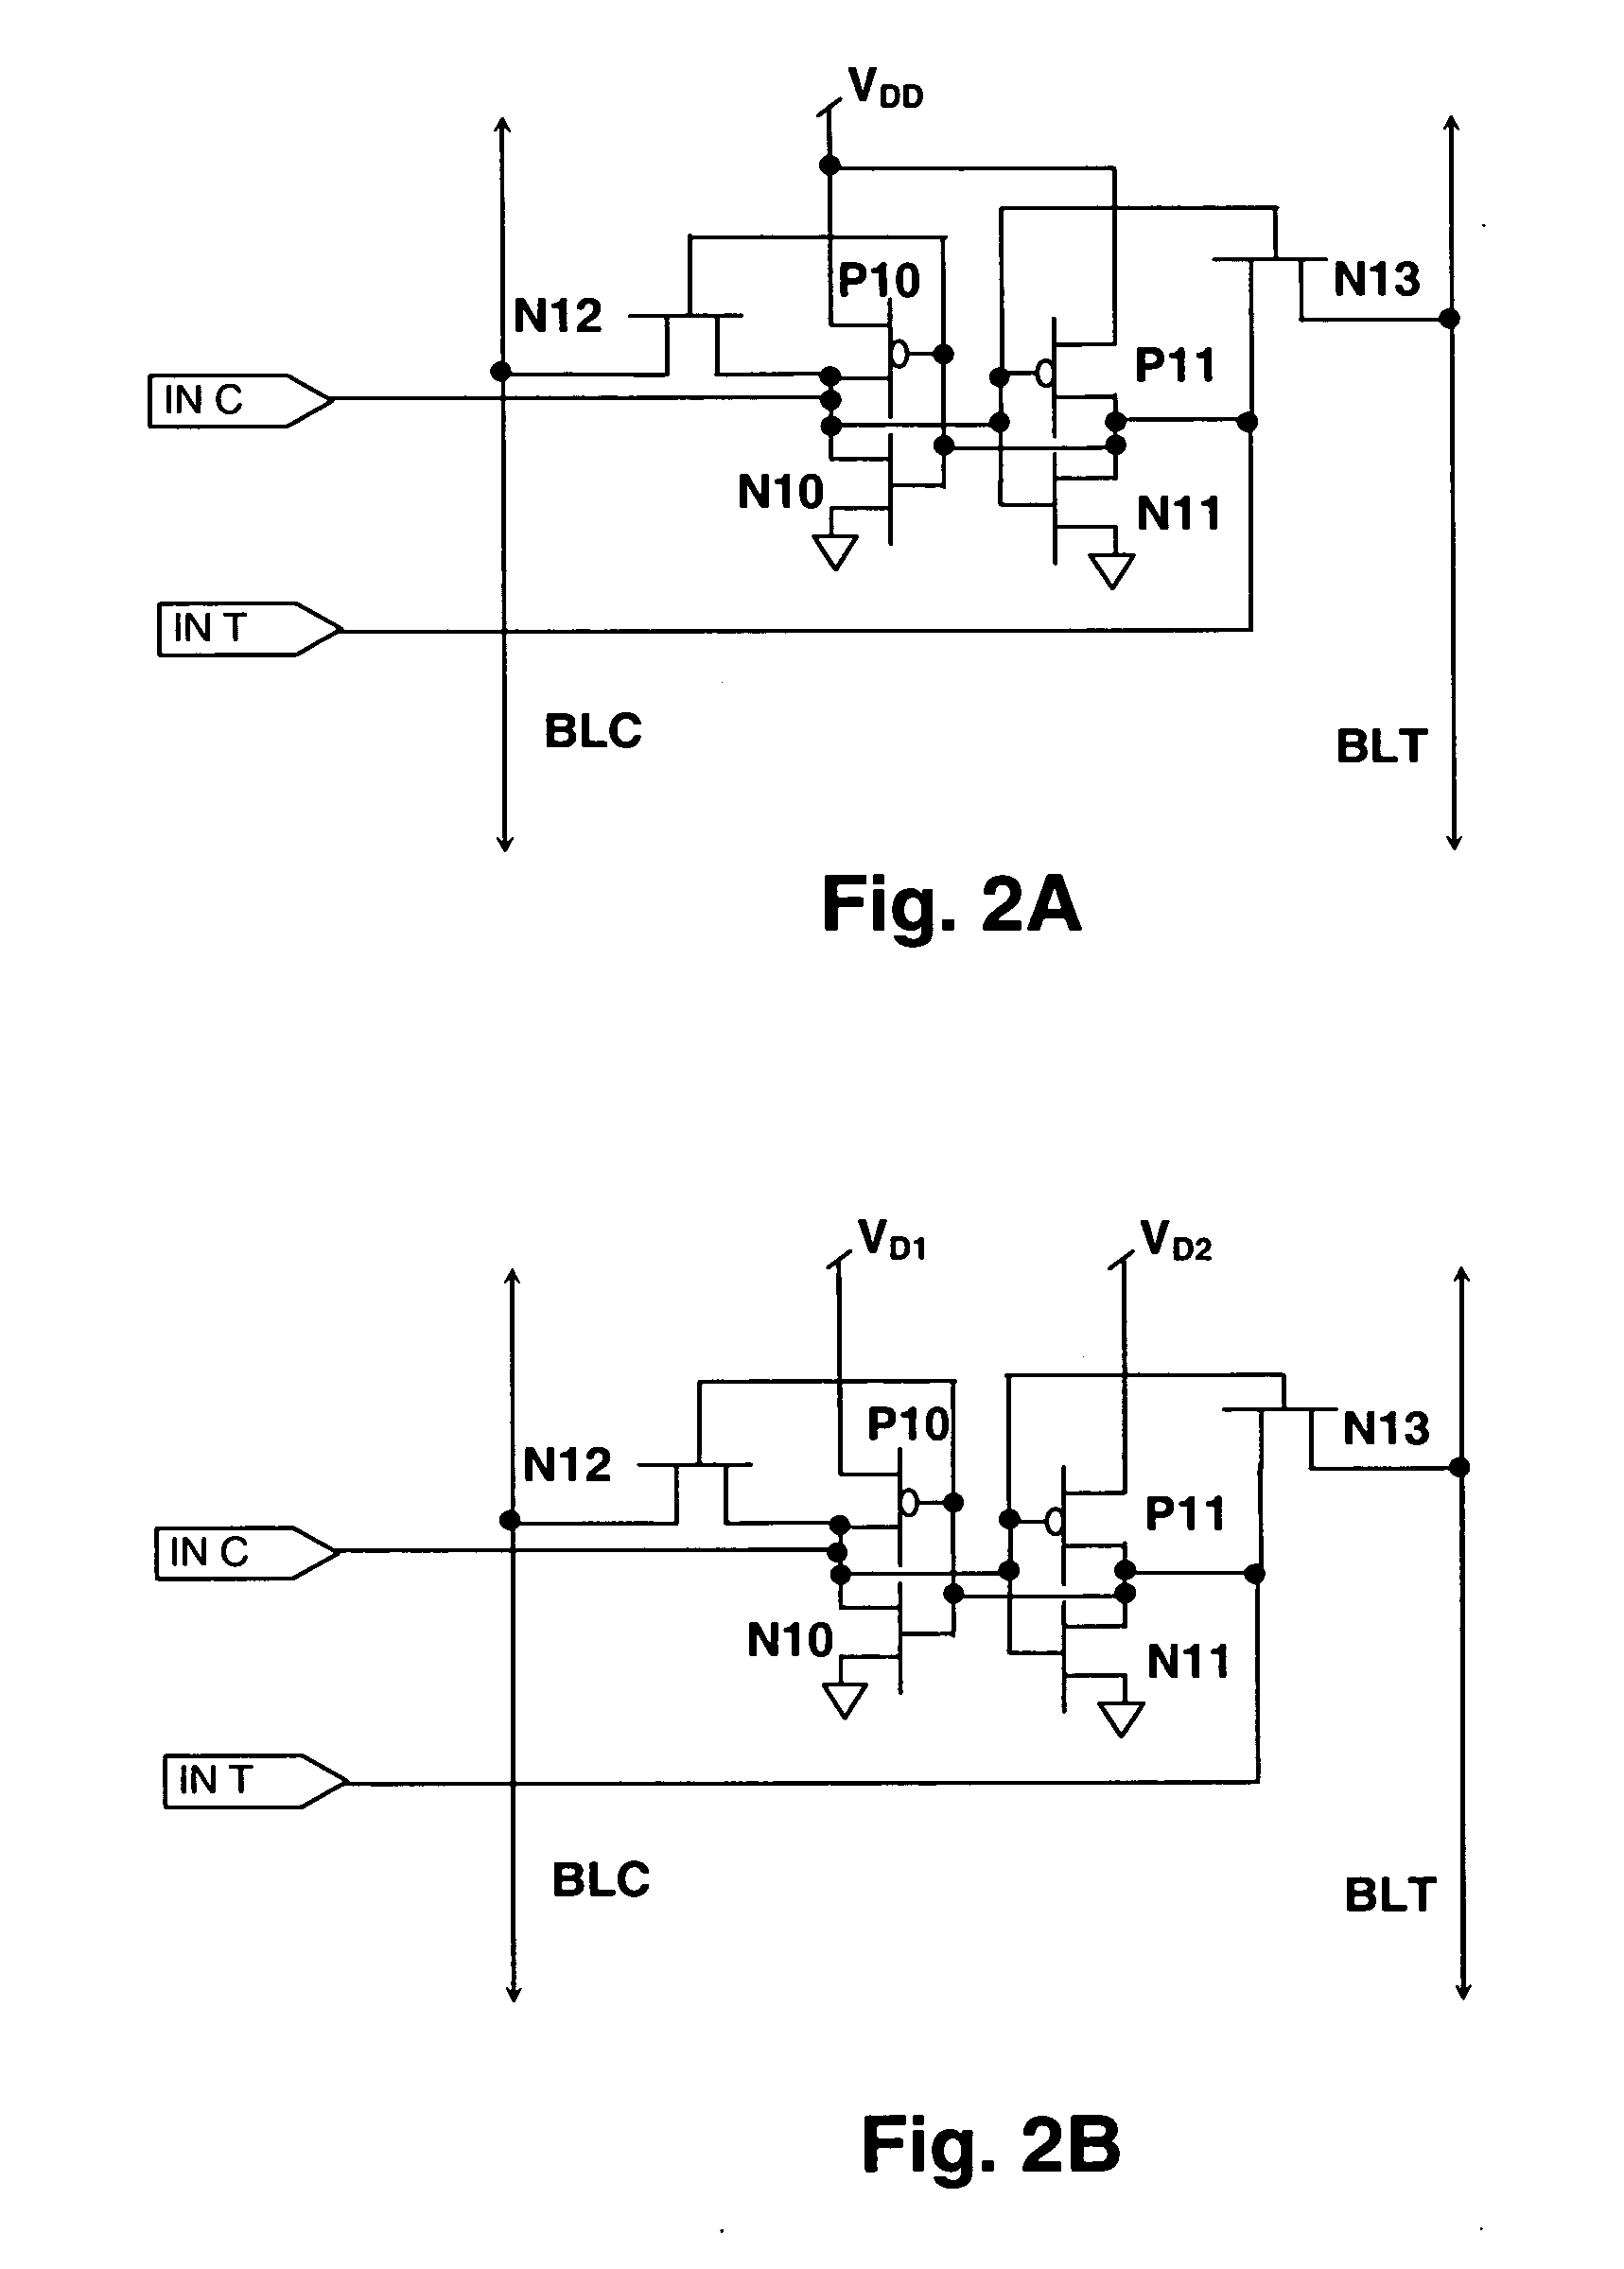 Ring oscillator row circuit for evaluating memory cell performance